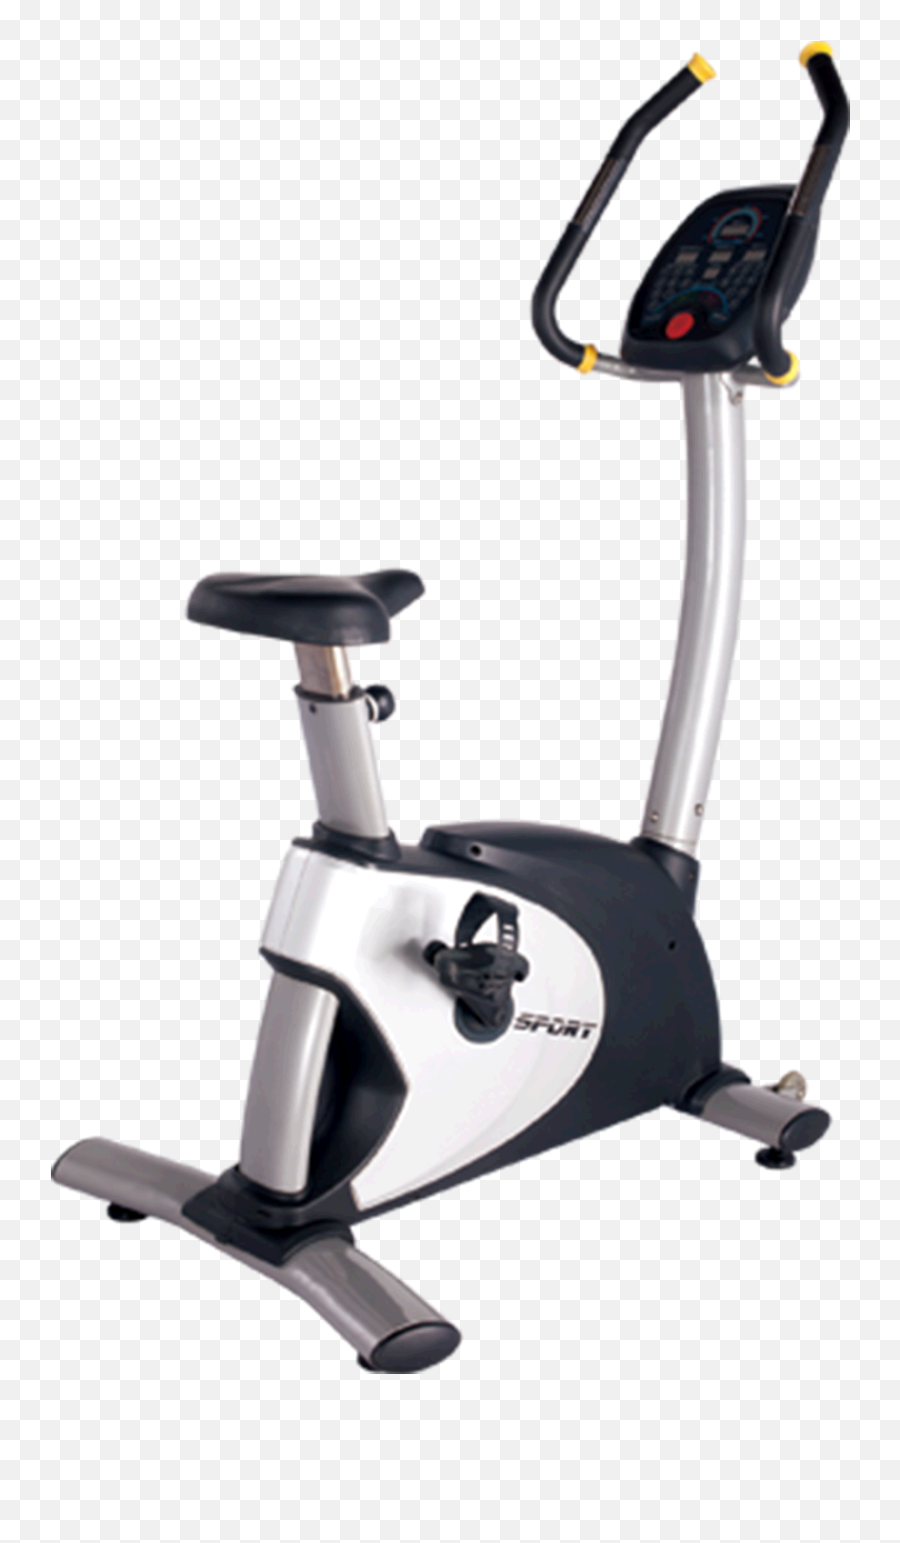 Free Exercise Bike Png Transparent Images Download - Exercise Bike Transparent Background,Bike Transparent